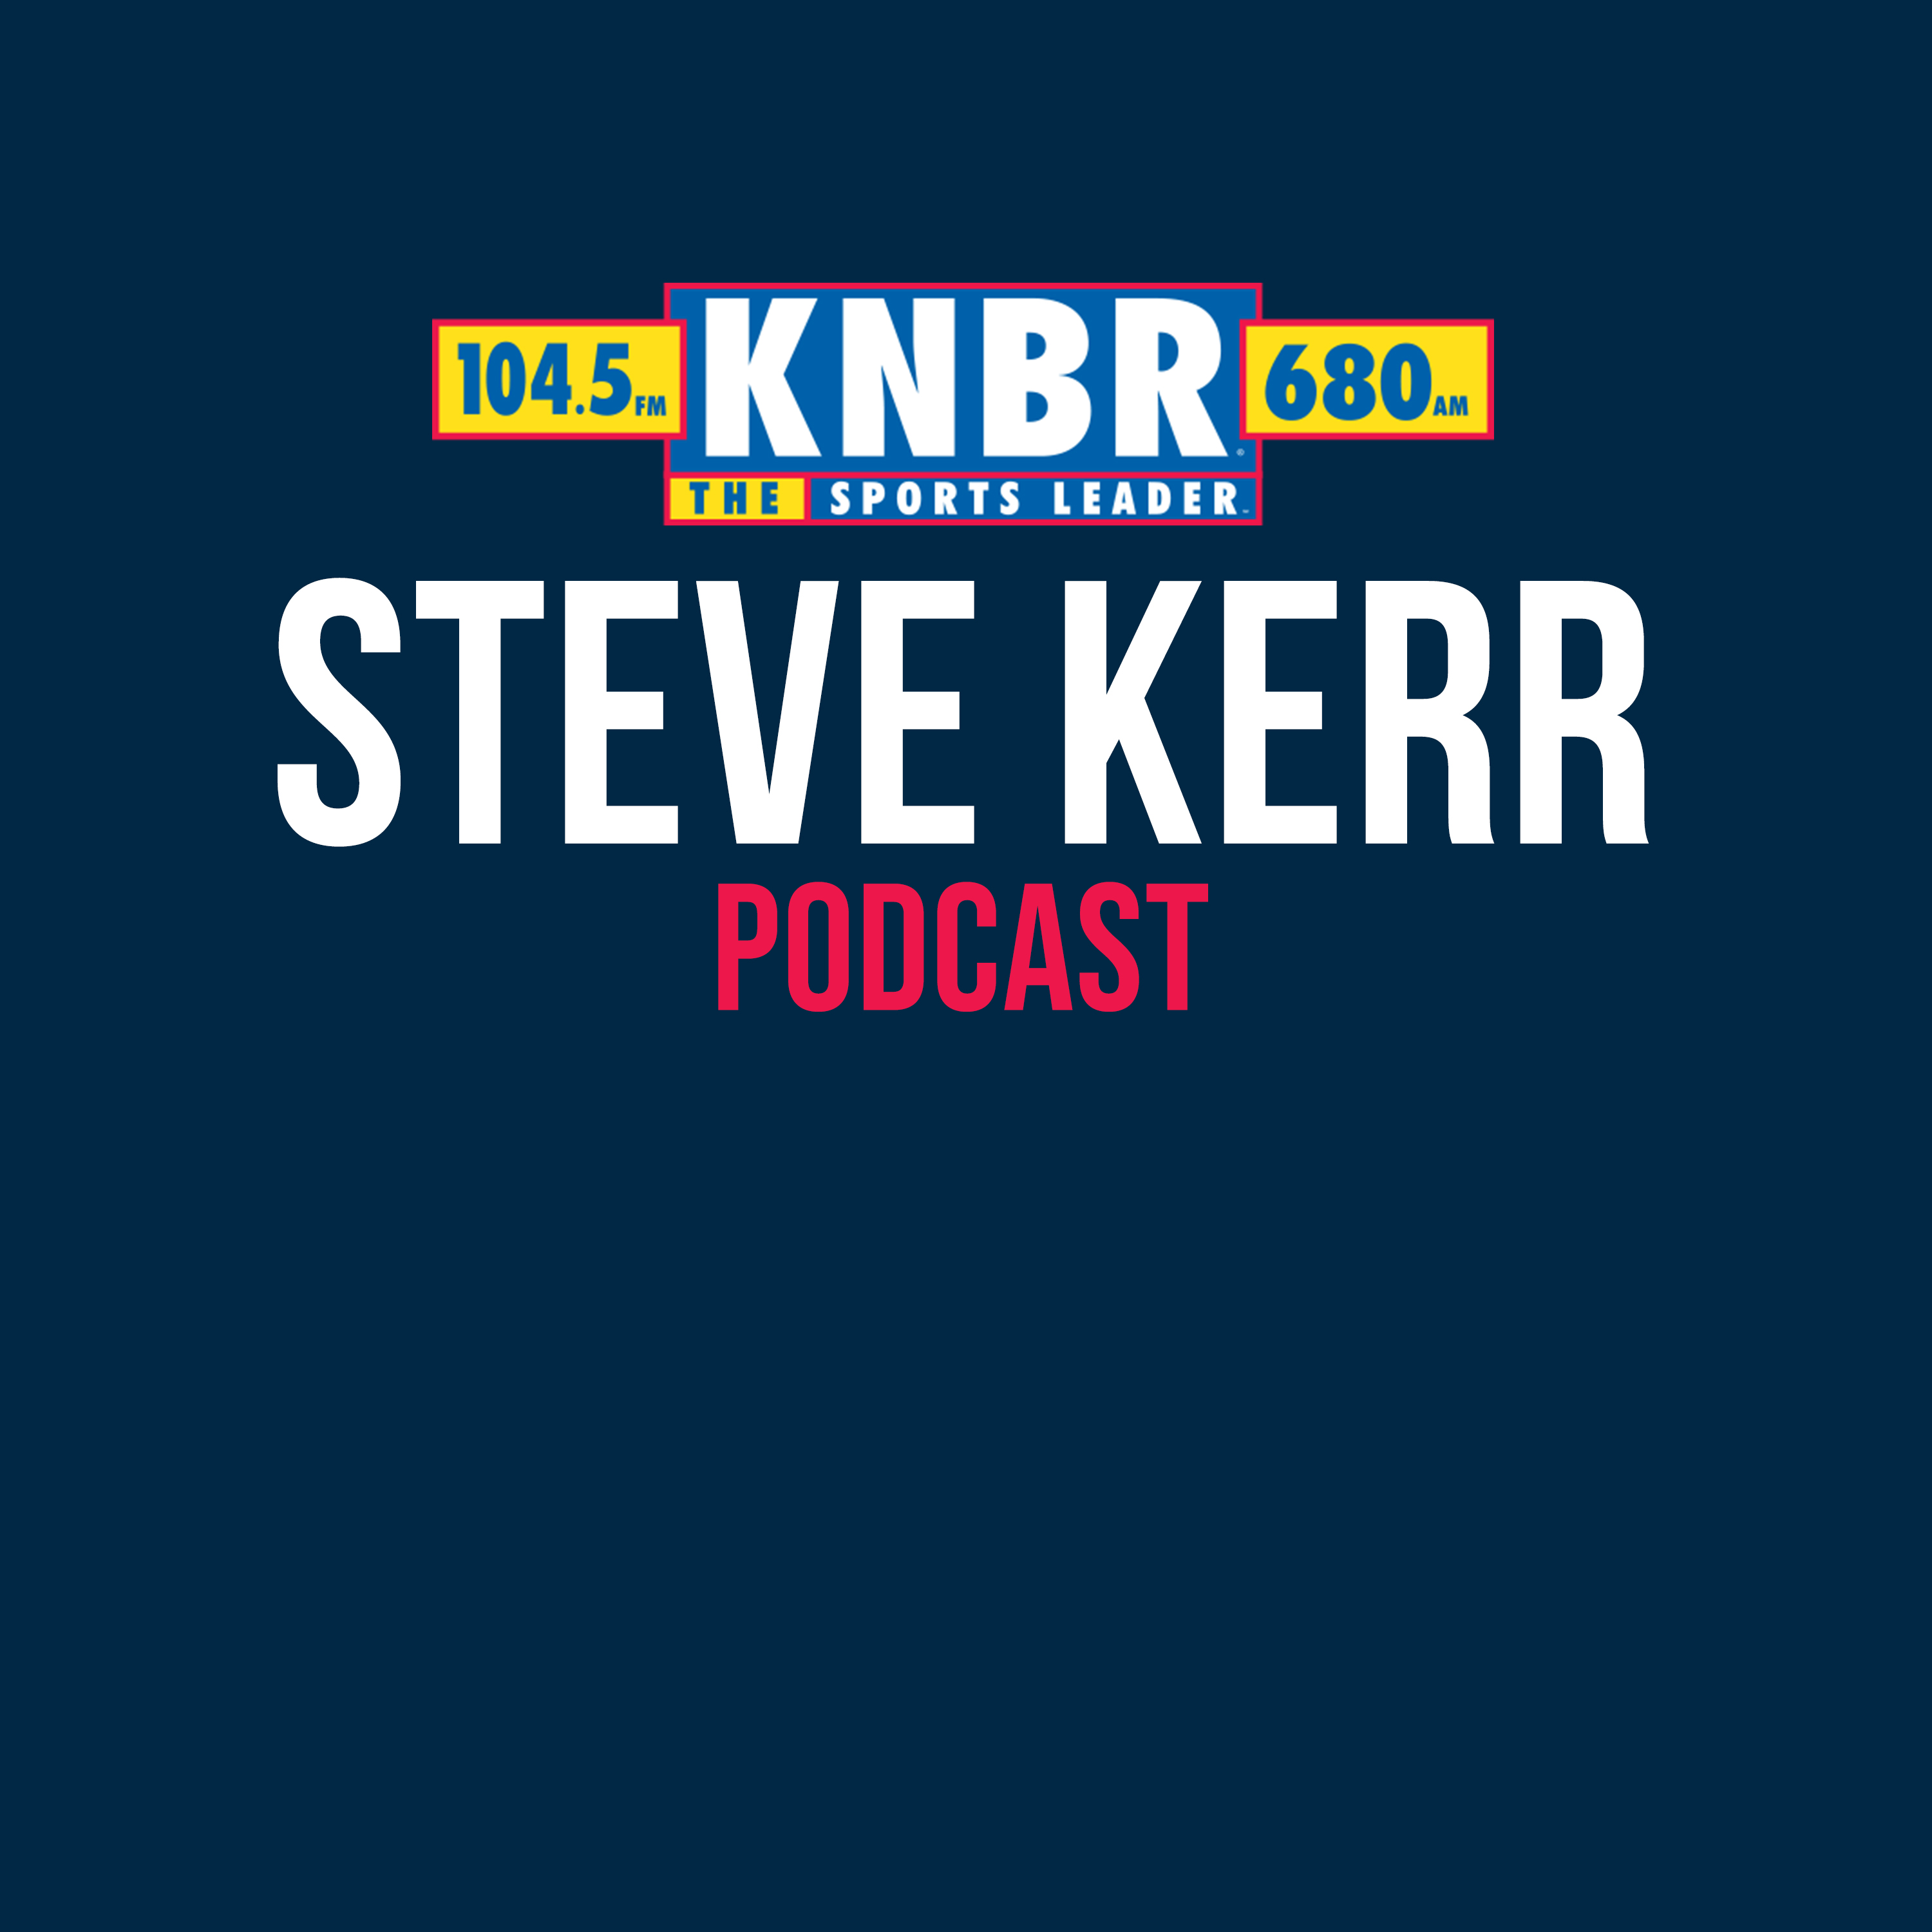 10-16 Steve Kerr joins Tolbert & Copes to discuss how the Warriors prepare for the start of the season